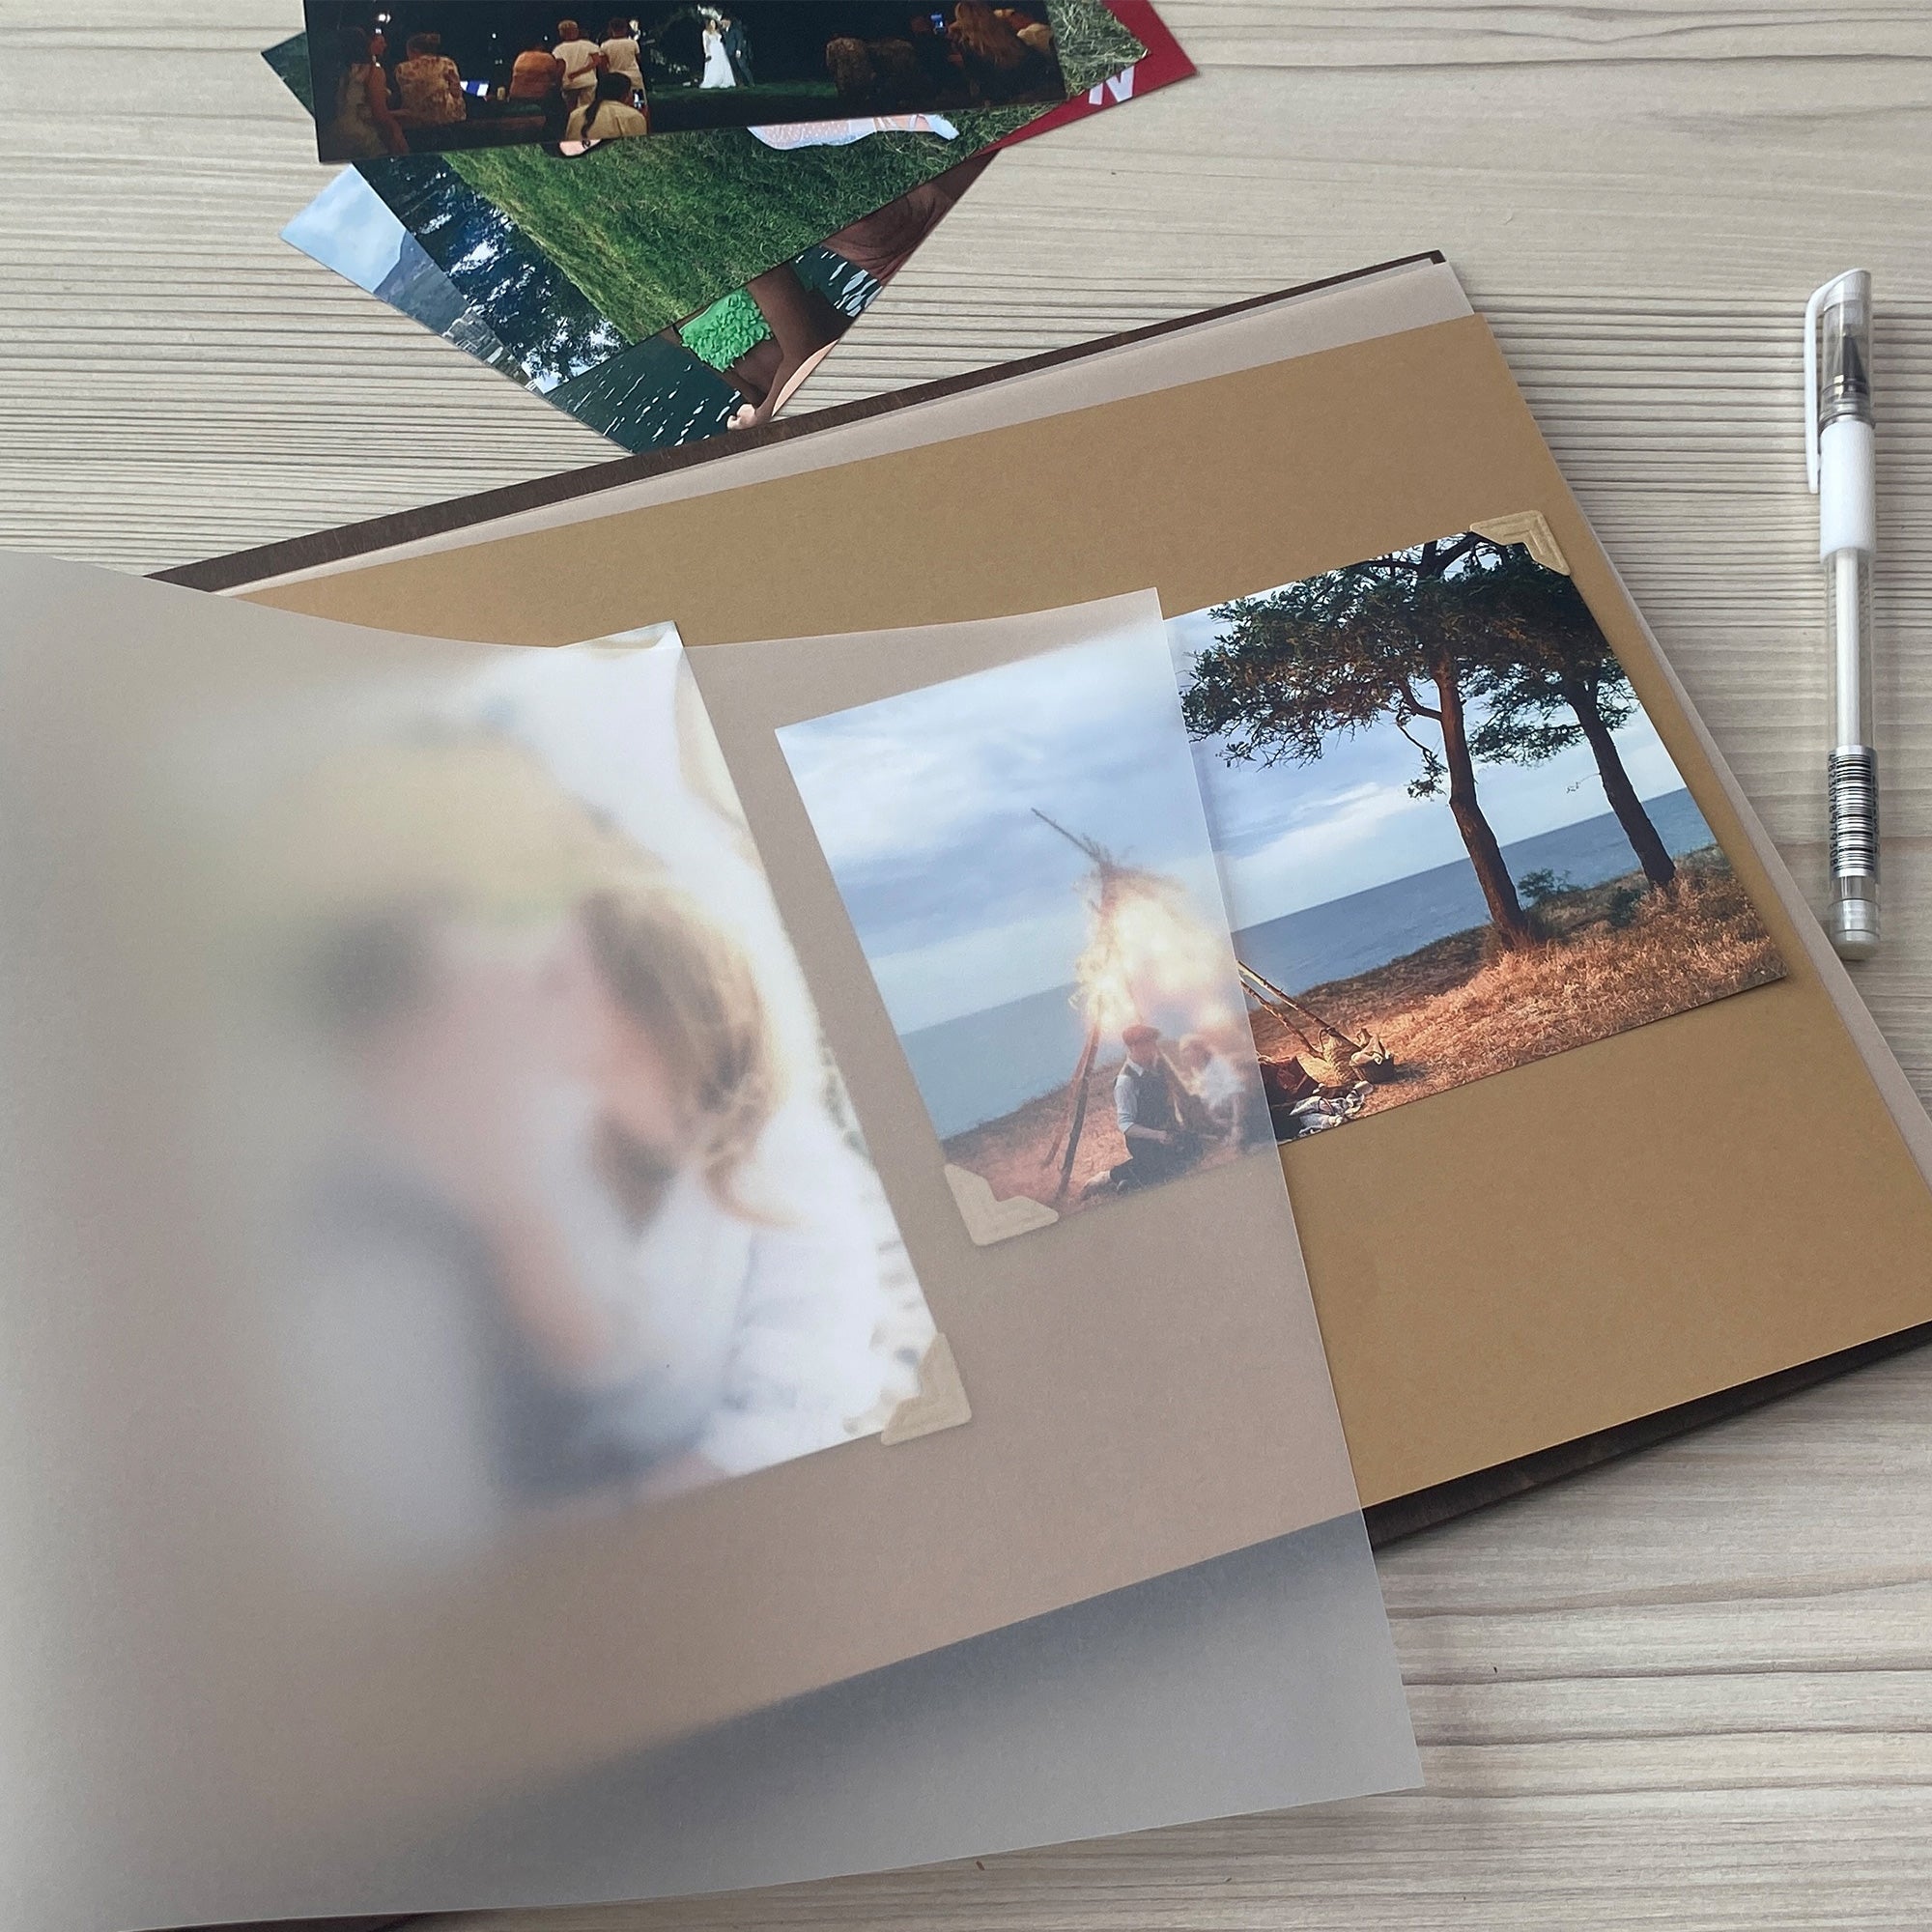 Personalized photo album cover and Wedding initials engraving